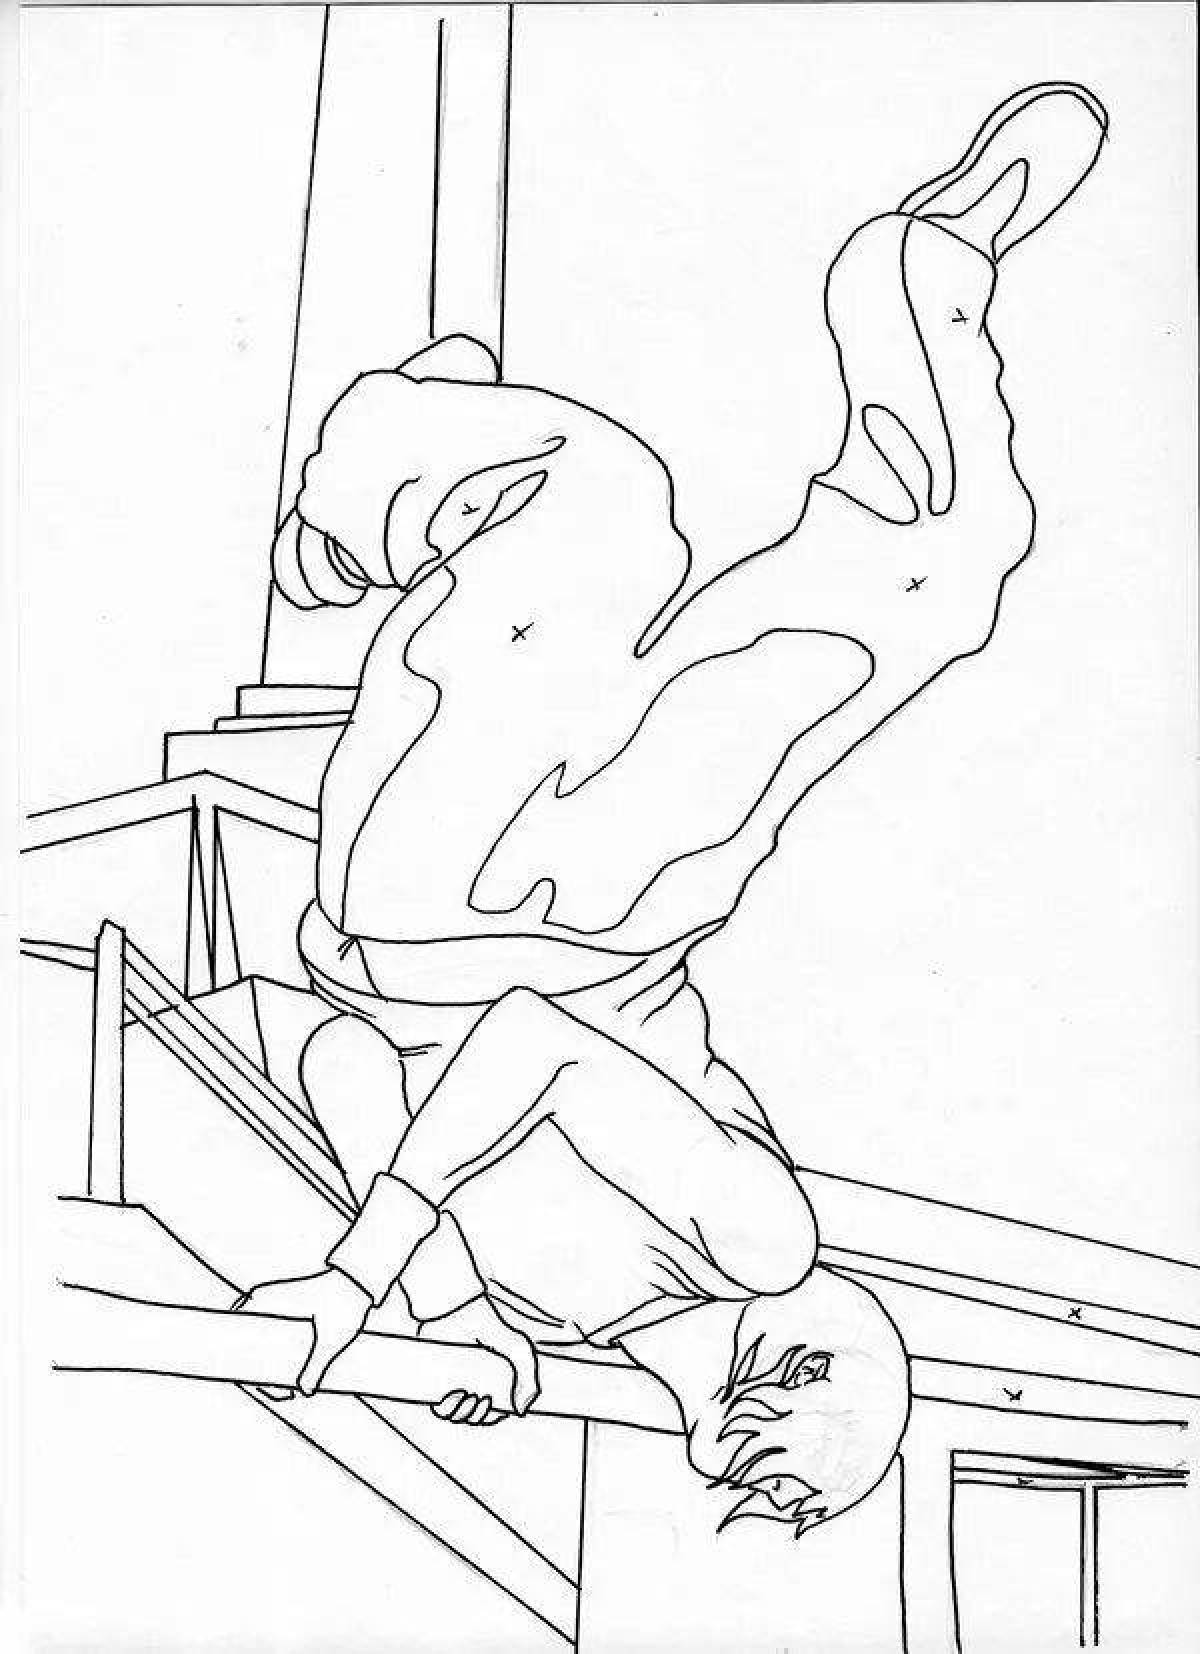 Exciting parkour coloring book